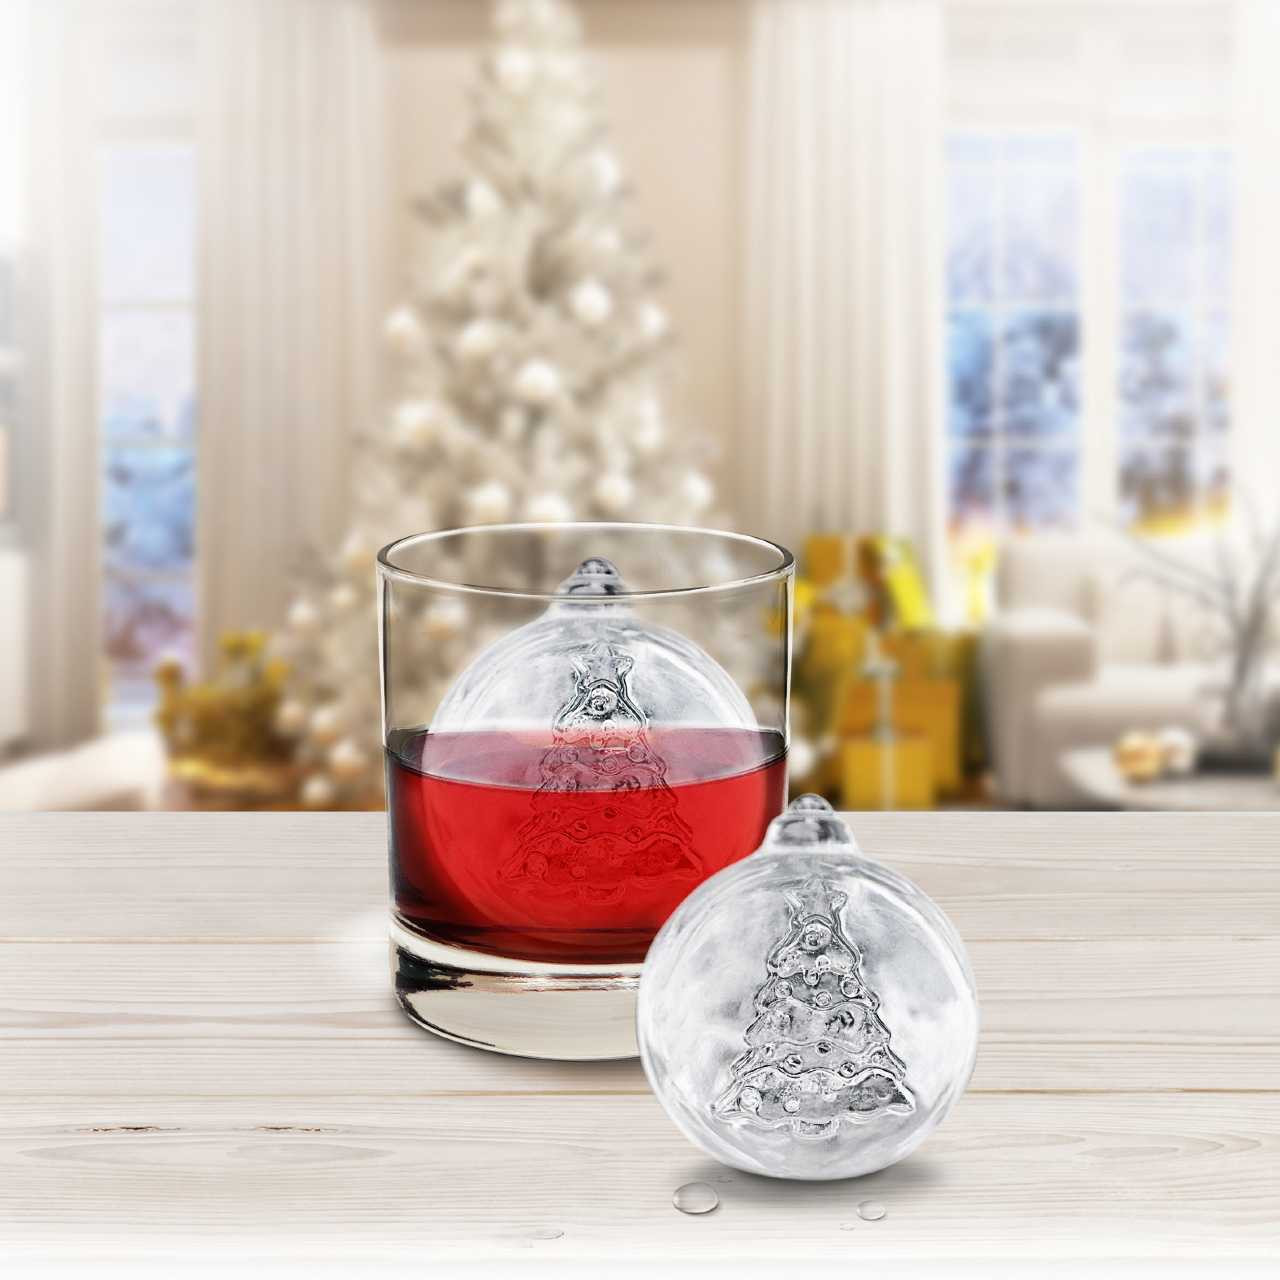 https://cdn11.bigcommerce.com/s-21kj3ntgv1/images/stencil/1280x1280/products/588/2471/Tovolo-Tree-Snowflake-Ornament-Ice-molds-lifestyle__49191.1652390372.jpg?c=2